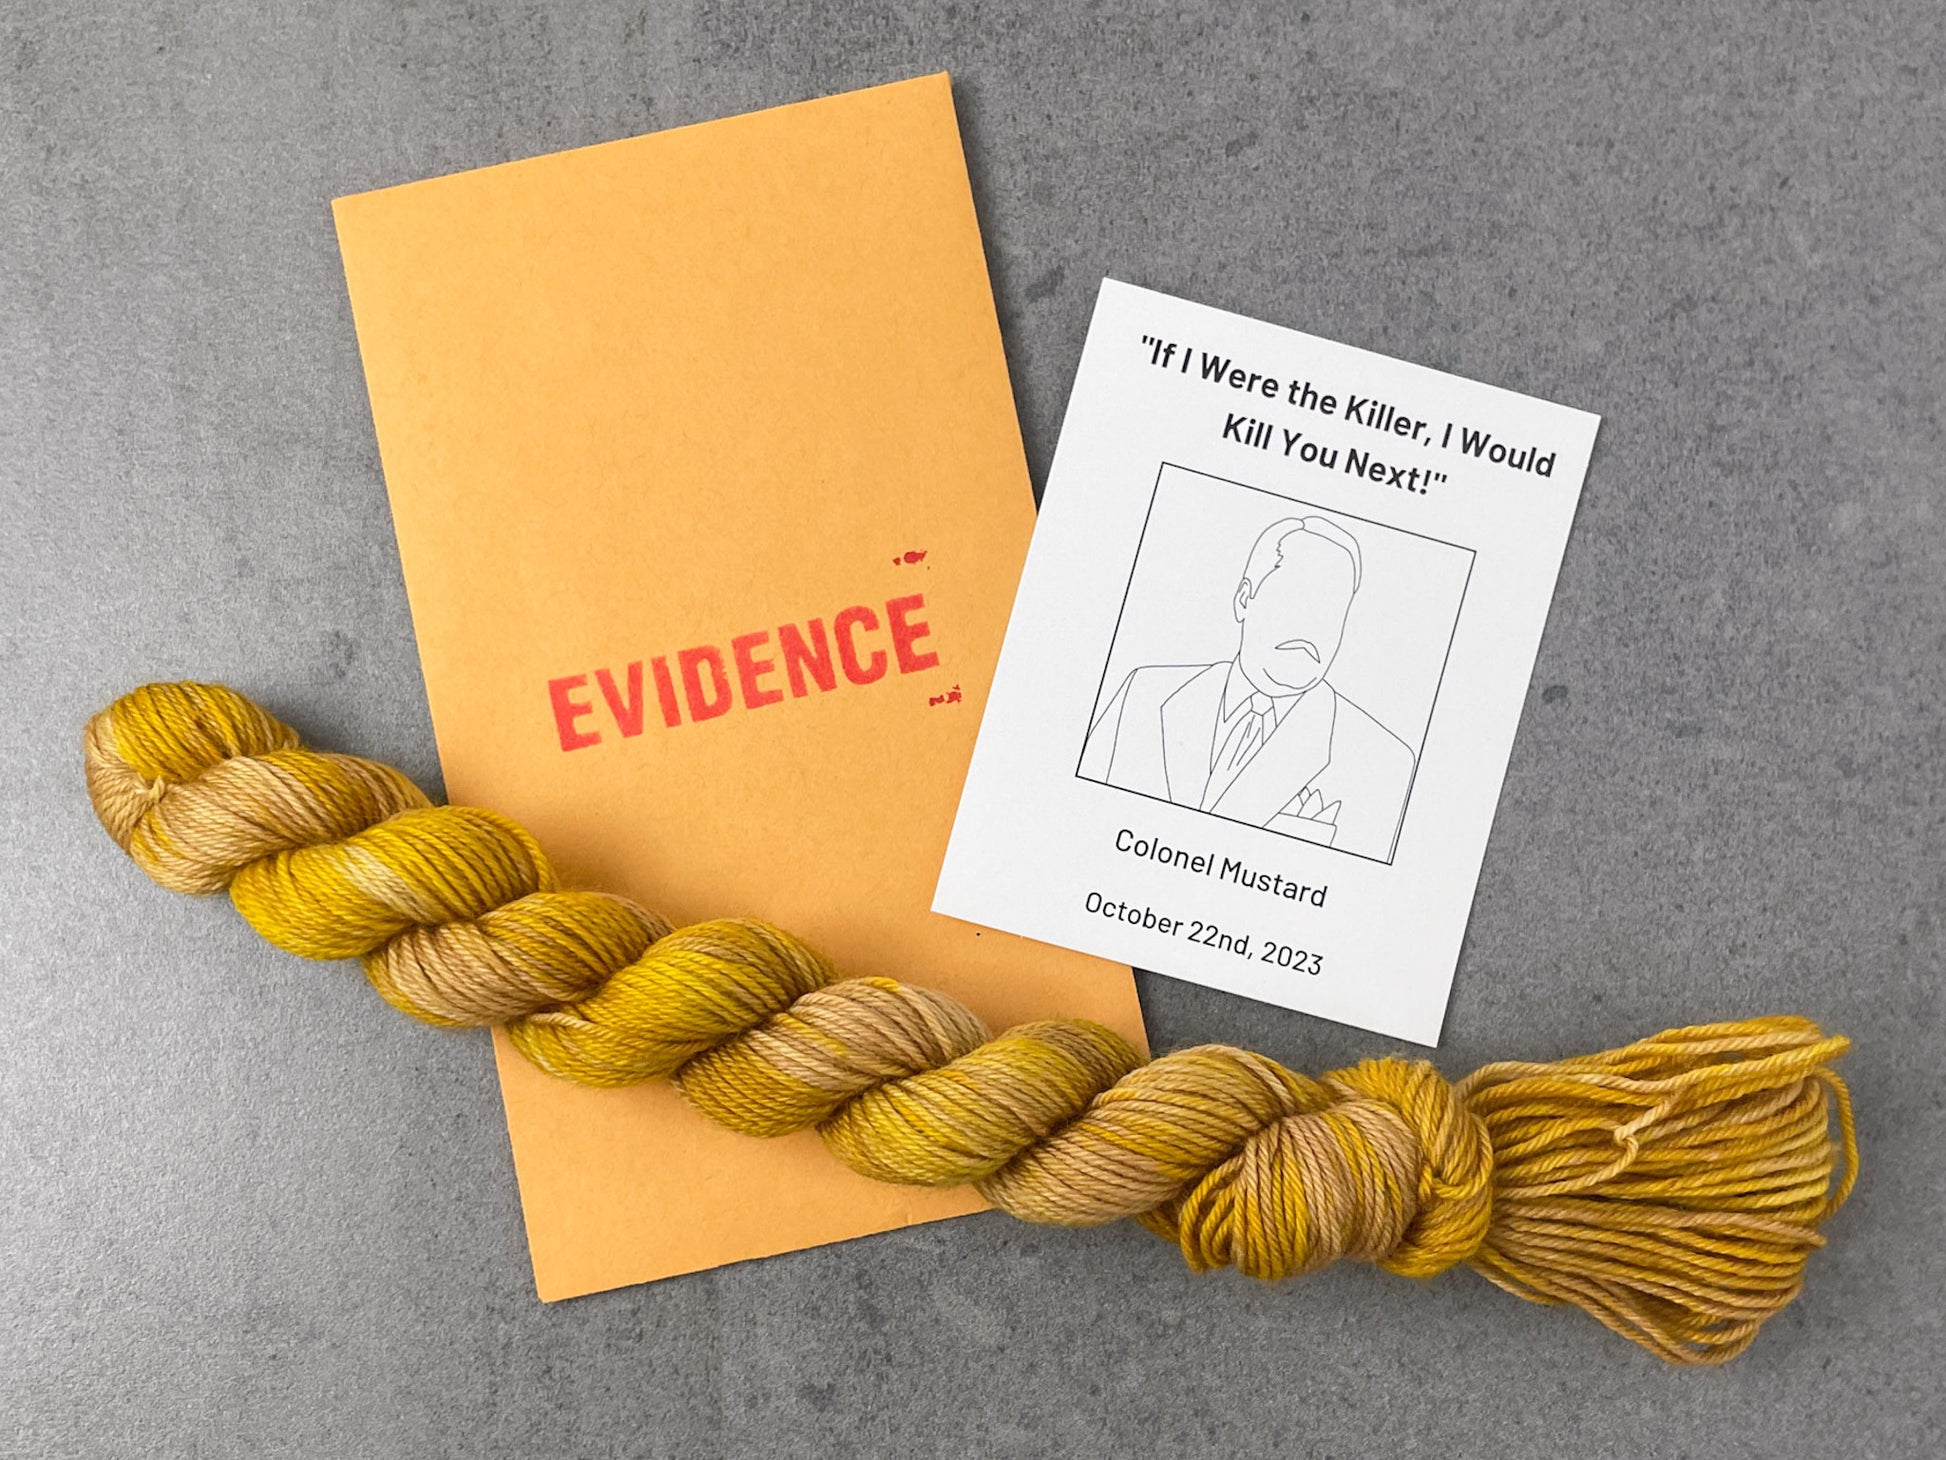 A skein of mustard yellow yarn on top of an envelope stamped with "Evidence" and a card with a drawing of Colonel Mustard on it.